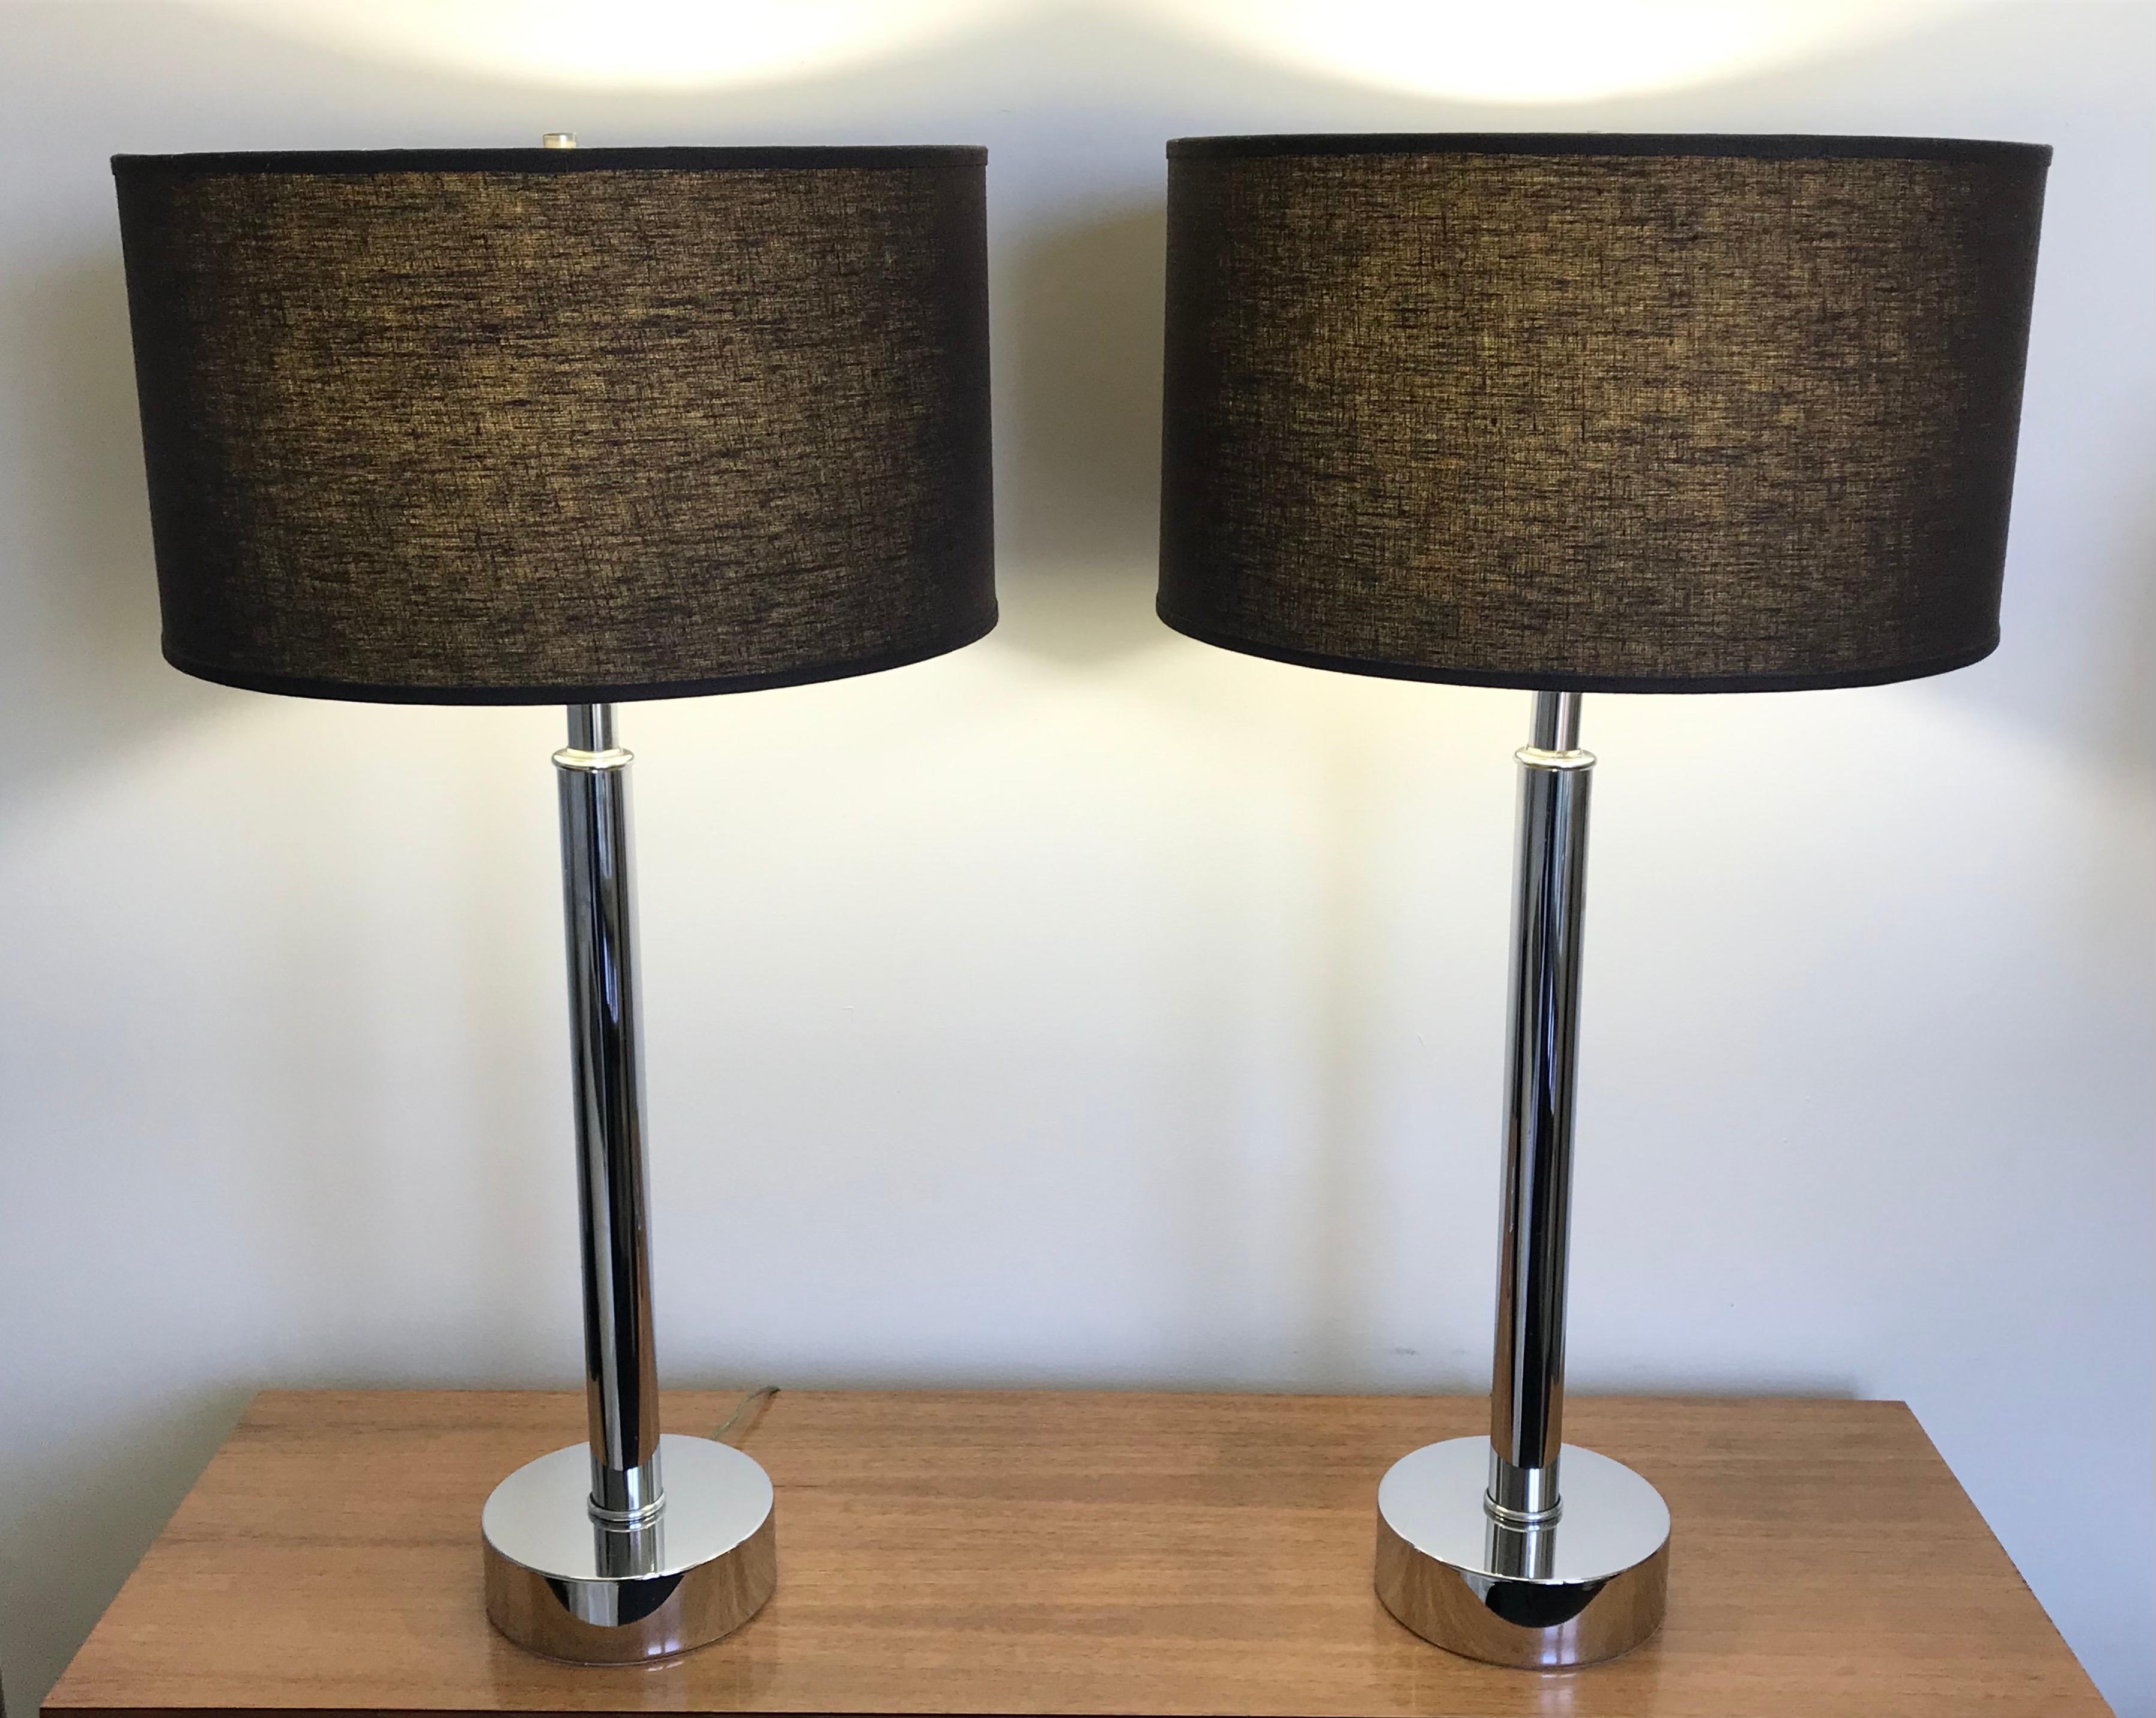 Really nice pair of Mid-Century Modern tubular chrome table lamps in the style of Laurel Lamp Co. Shades not included.